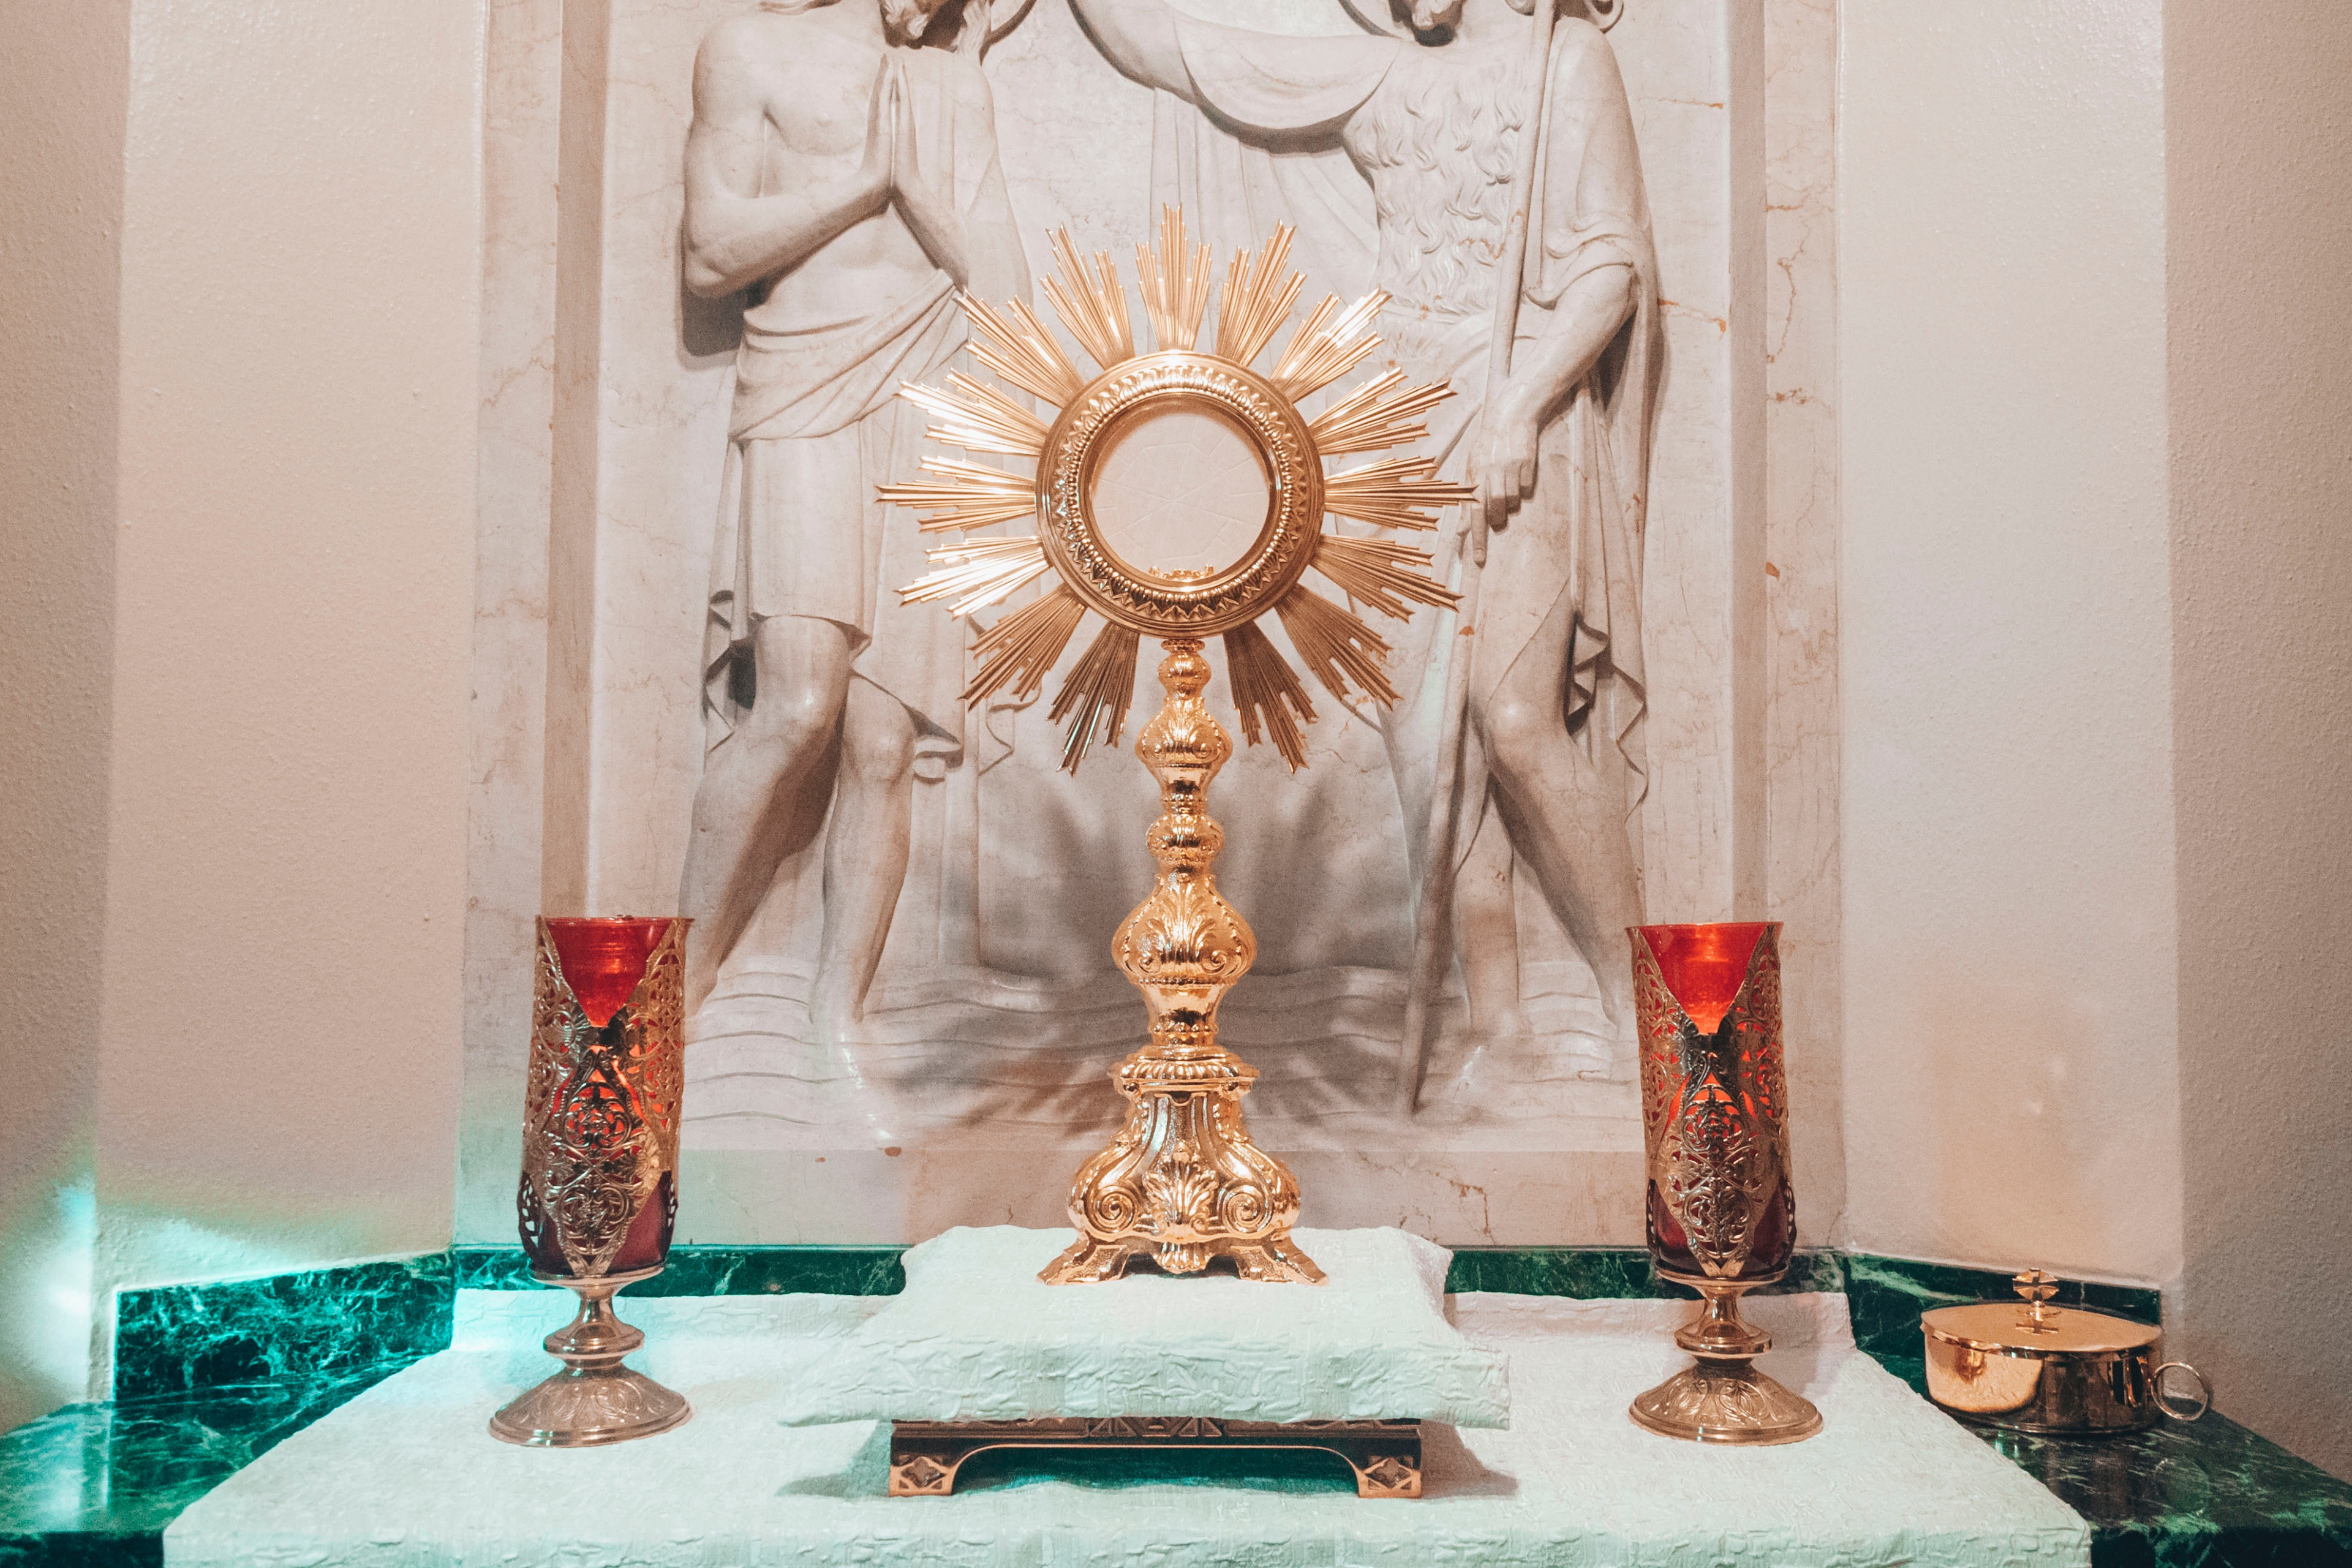 A photo of the Blessed Sacrament exposed in a monstrance, with lit candles either side.